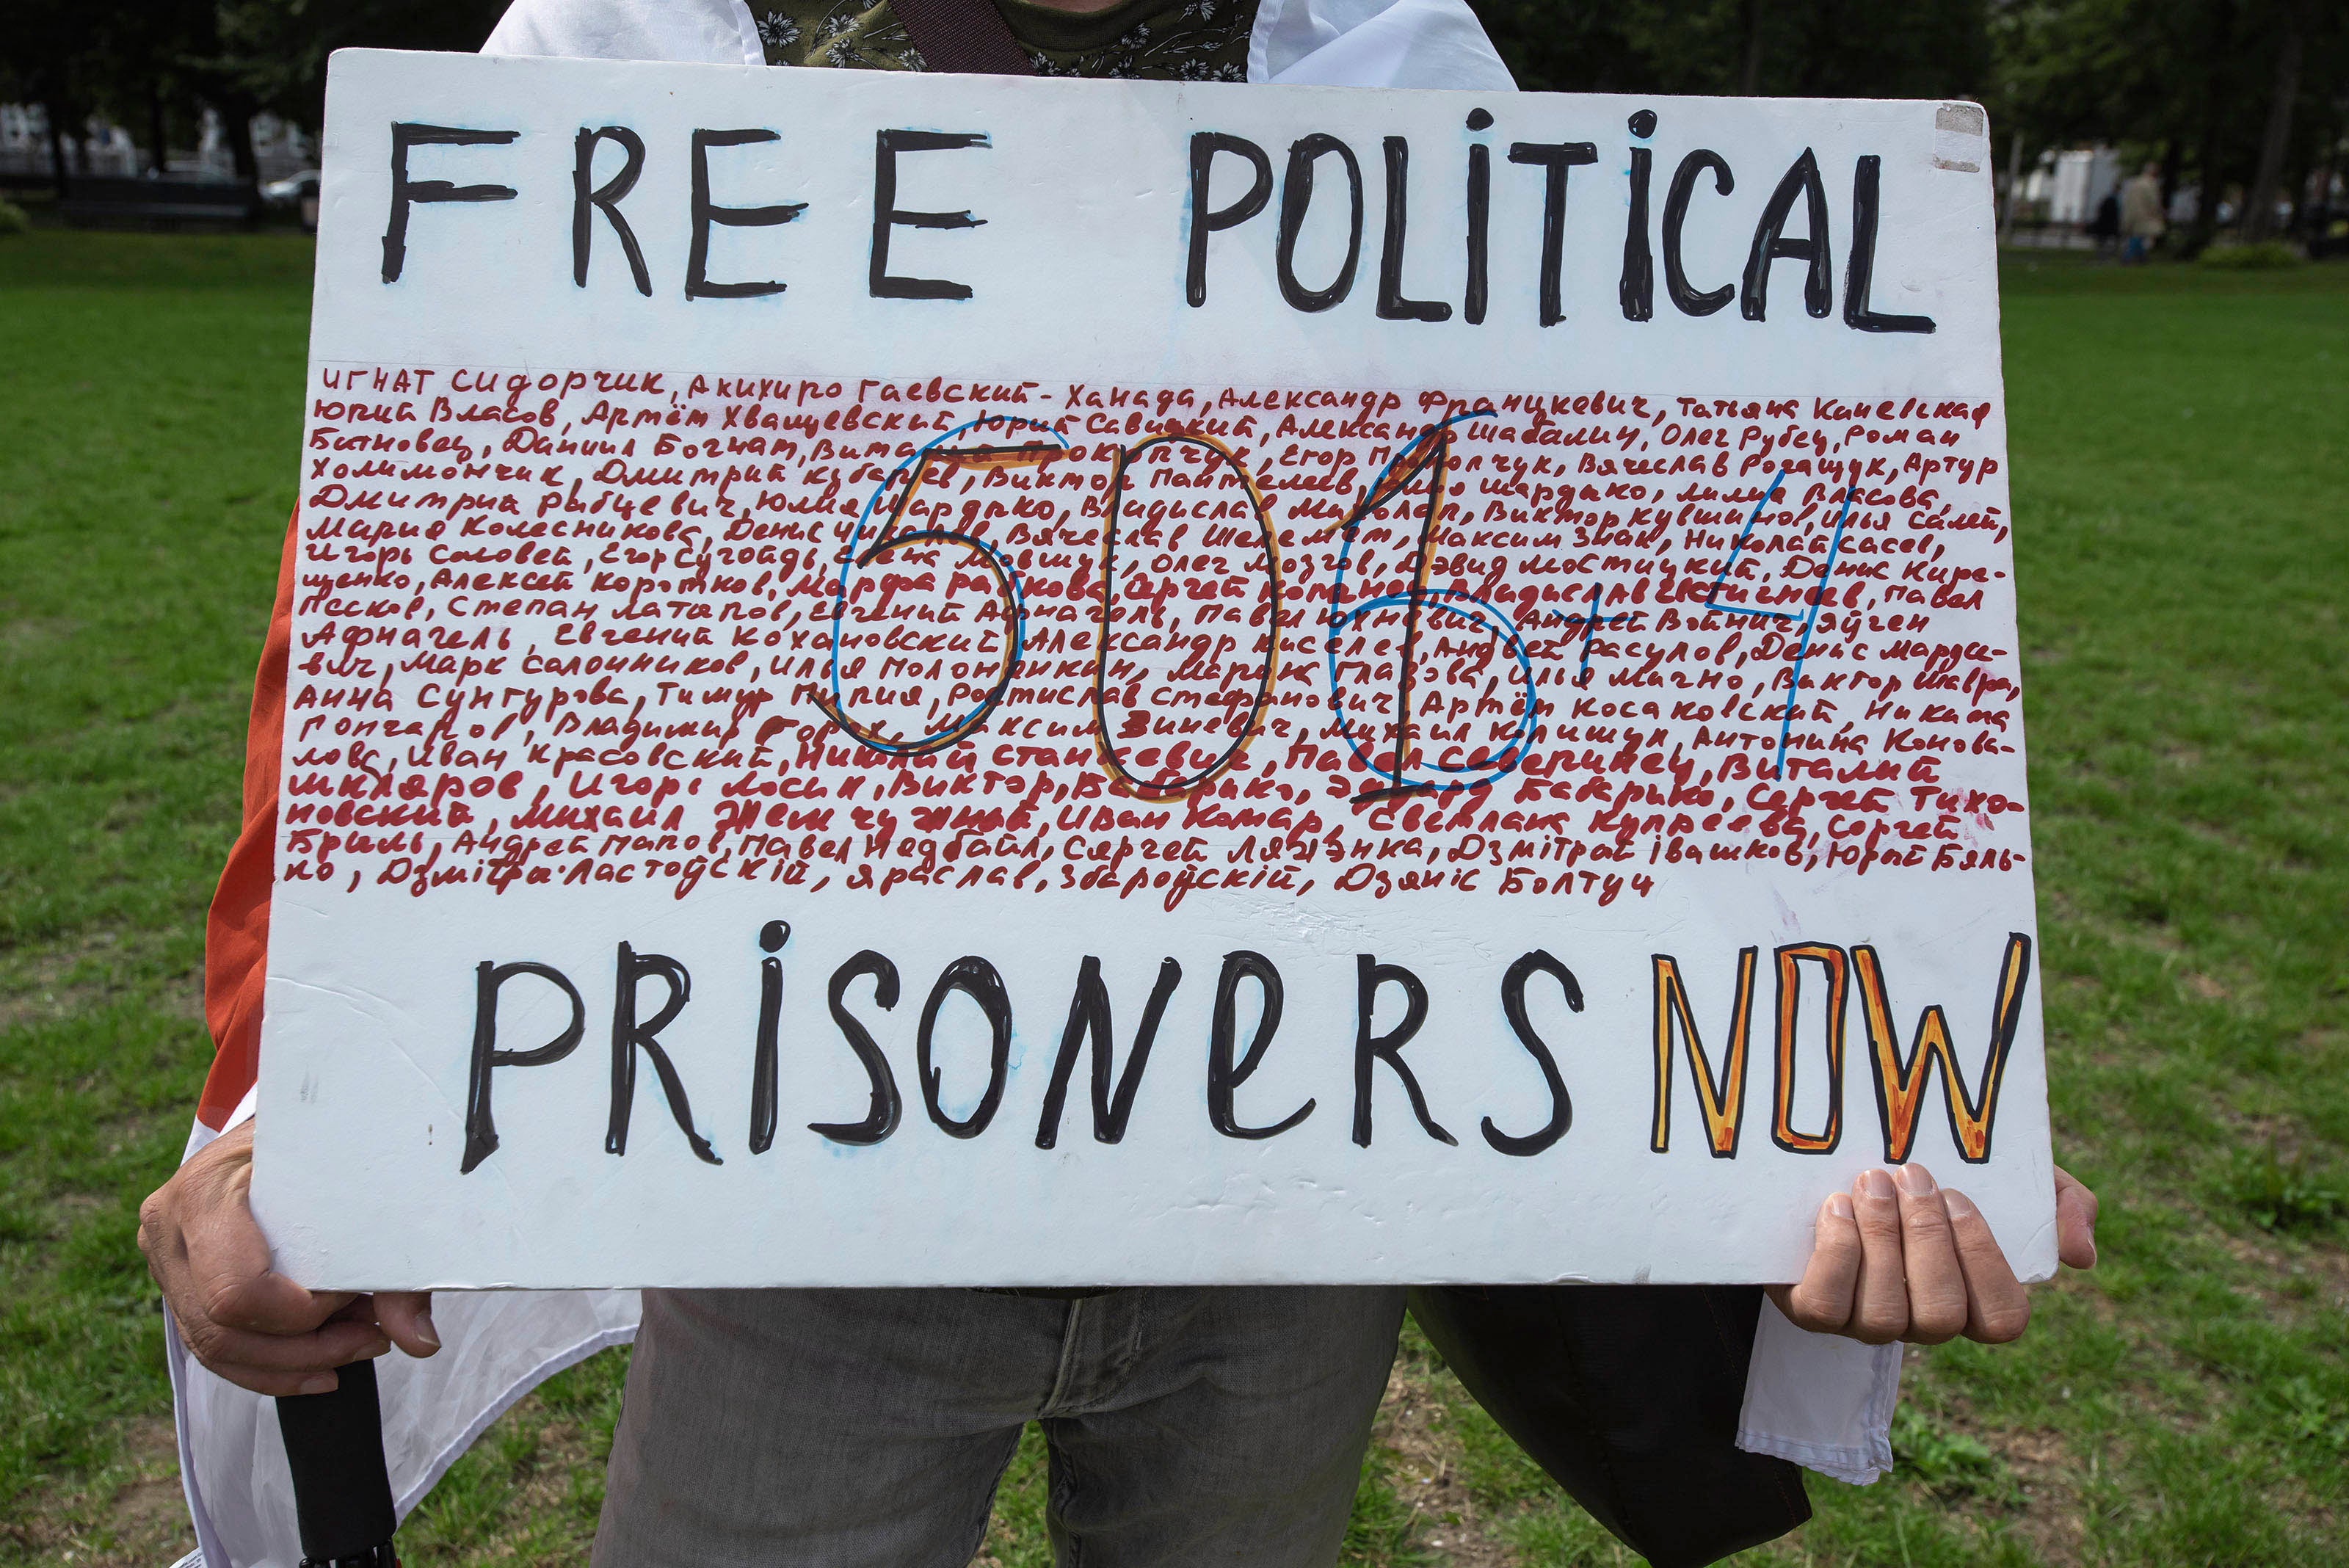 In The Hague, Netherlands, on August 7, a demonstrator holds a placard showing the names of some of those arbitrarily detained in Belarus for protesting against President Alexander Lukashenko, and calling for their release.